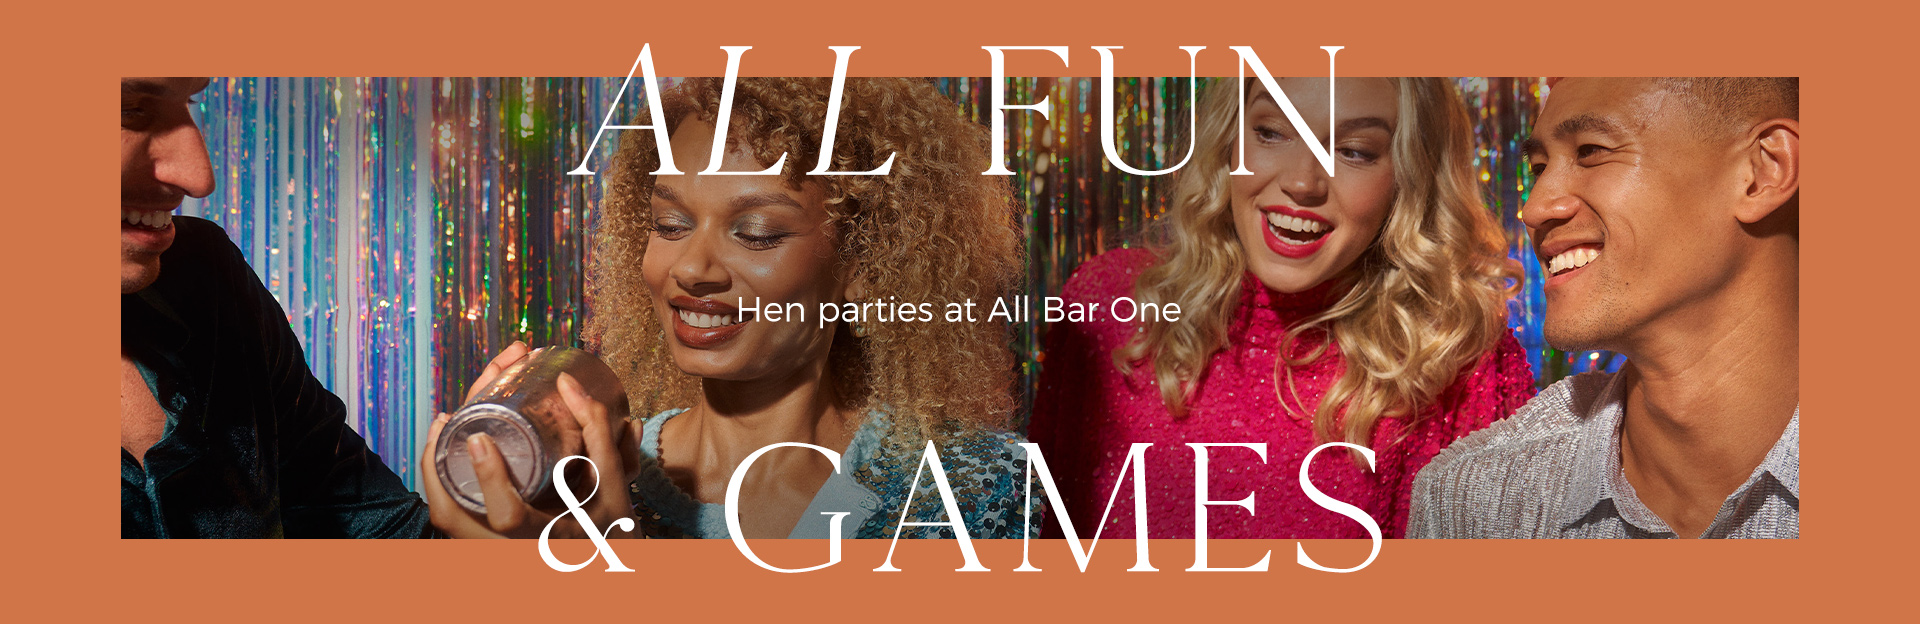 Hen parties at All Bar One Chester